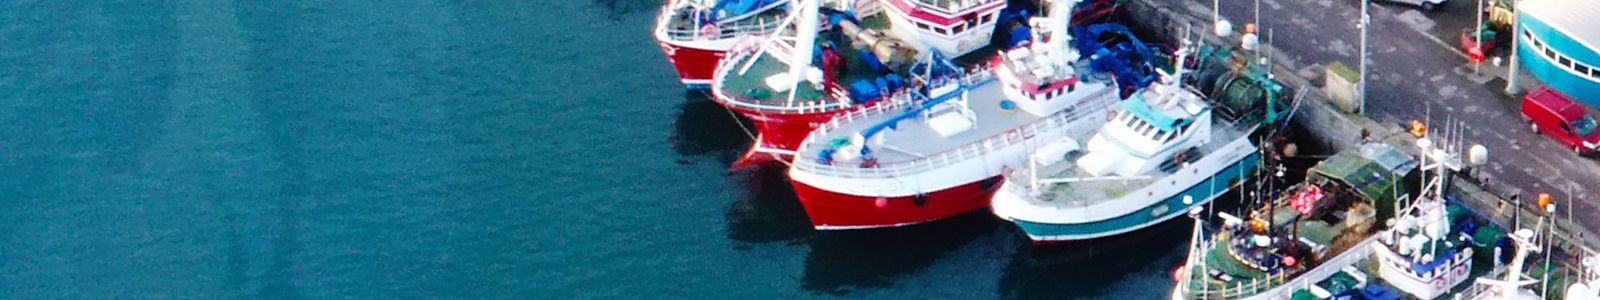 multiple fishing trawlers berthed at sea port pier